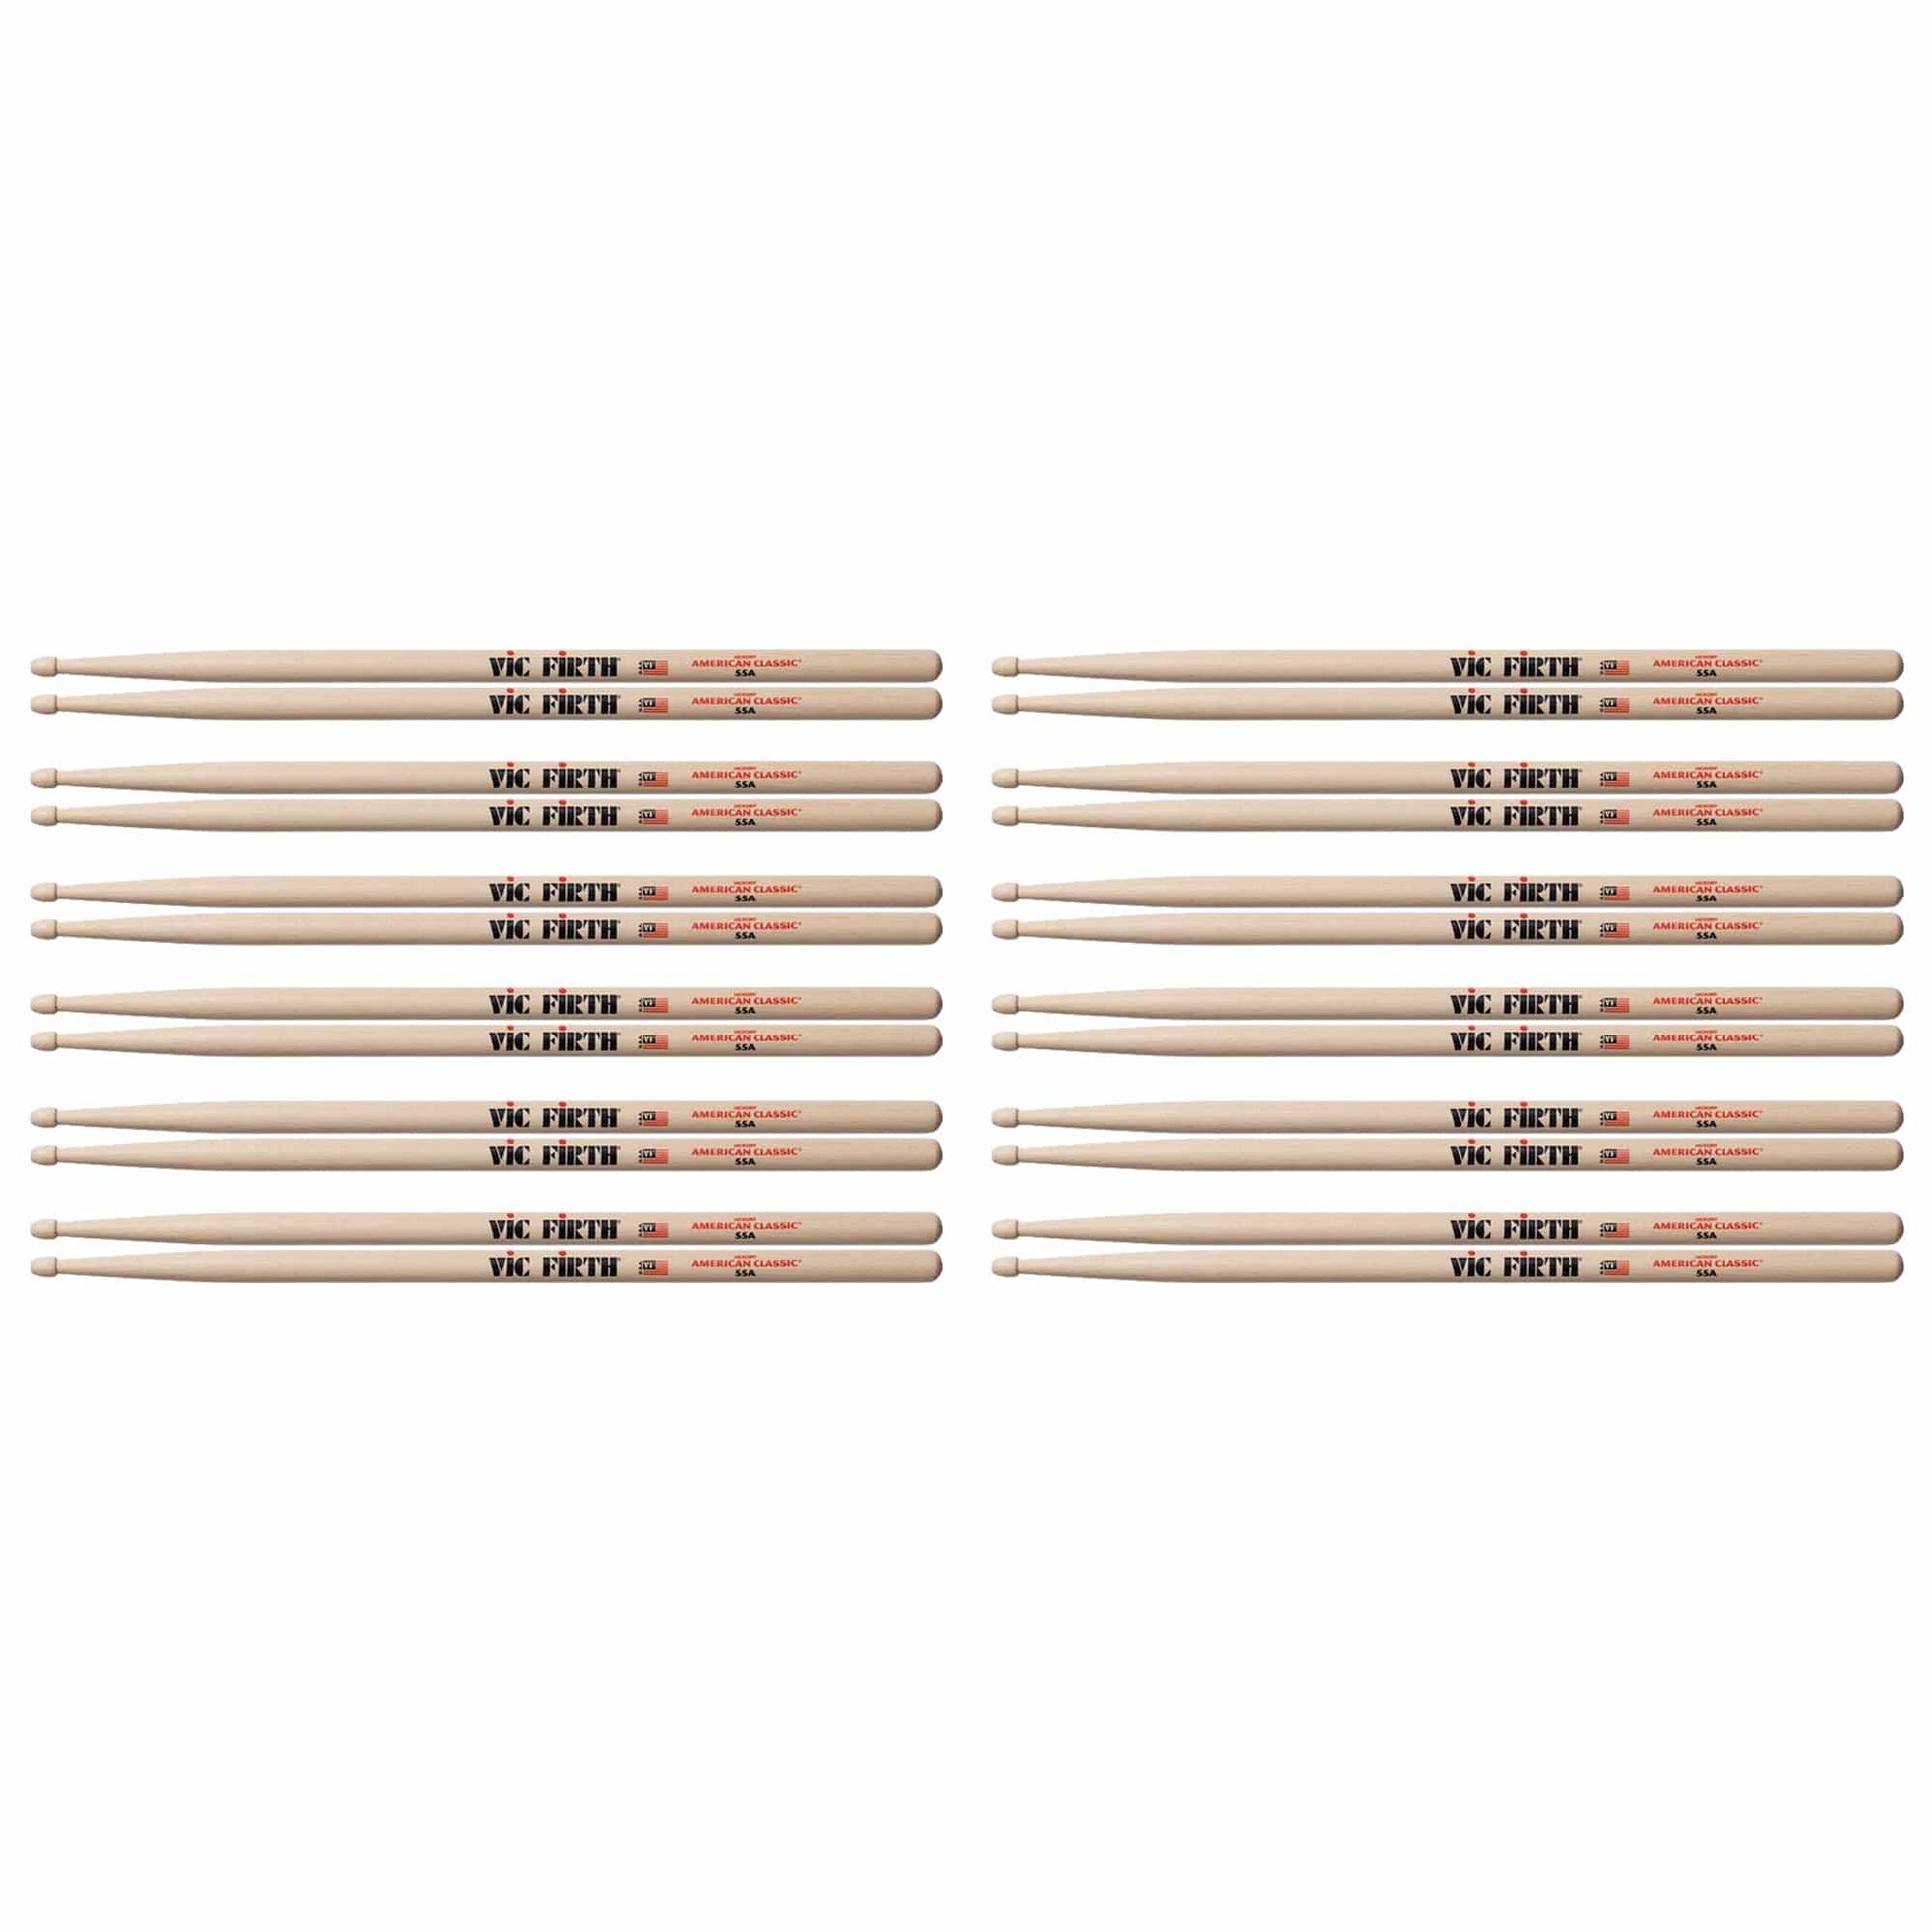 Vic Firth 55A Wood Tip Drum Sticks (12 Pair Bundle) Drums and Percussion / Parts and Accessories / Drum Sticks and Mallets